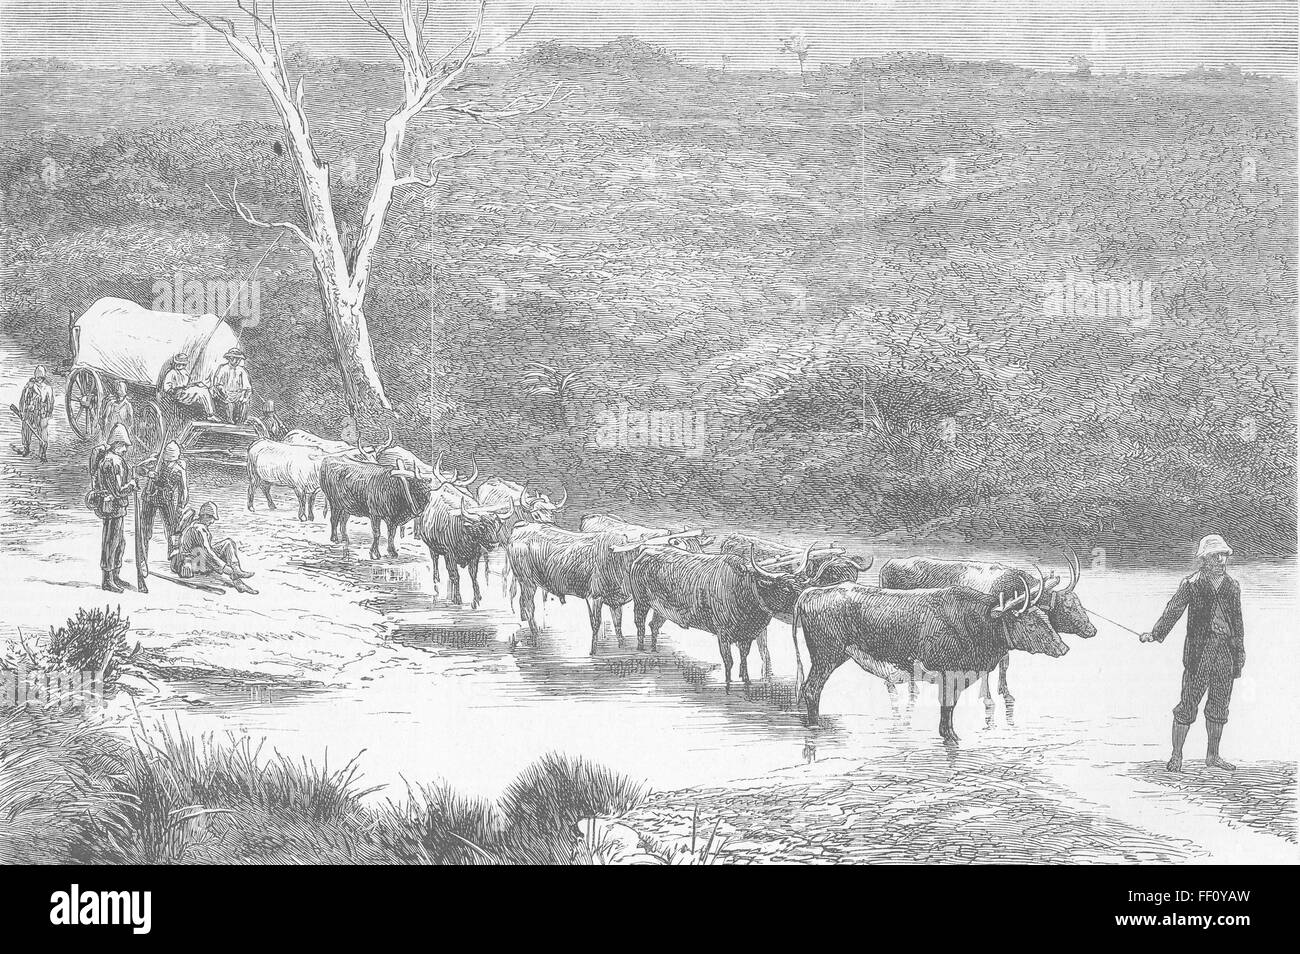 SOUTH AFRICA Xhosa War span of oxen, Natal 1879. The Graphic Stock Photo